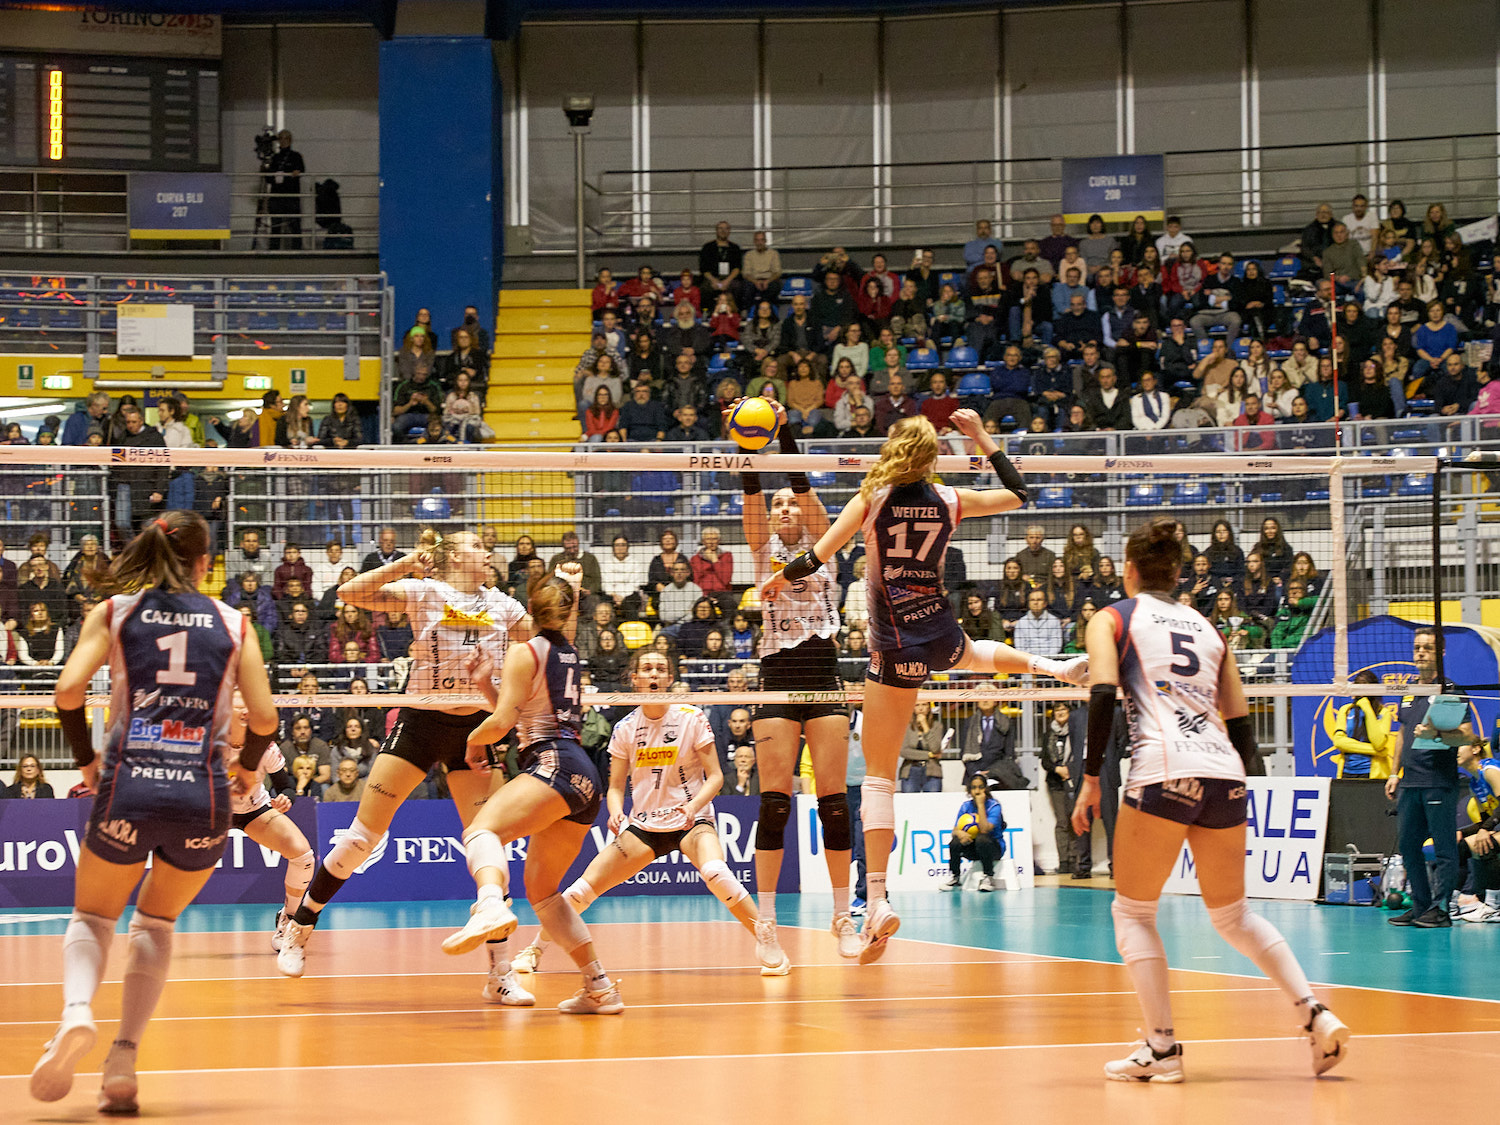 WorldofVolley CHALLENGE CUP W Chieri and Lugoj in the CEV Challenge Cup Finals